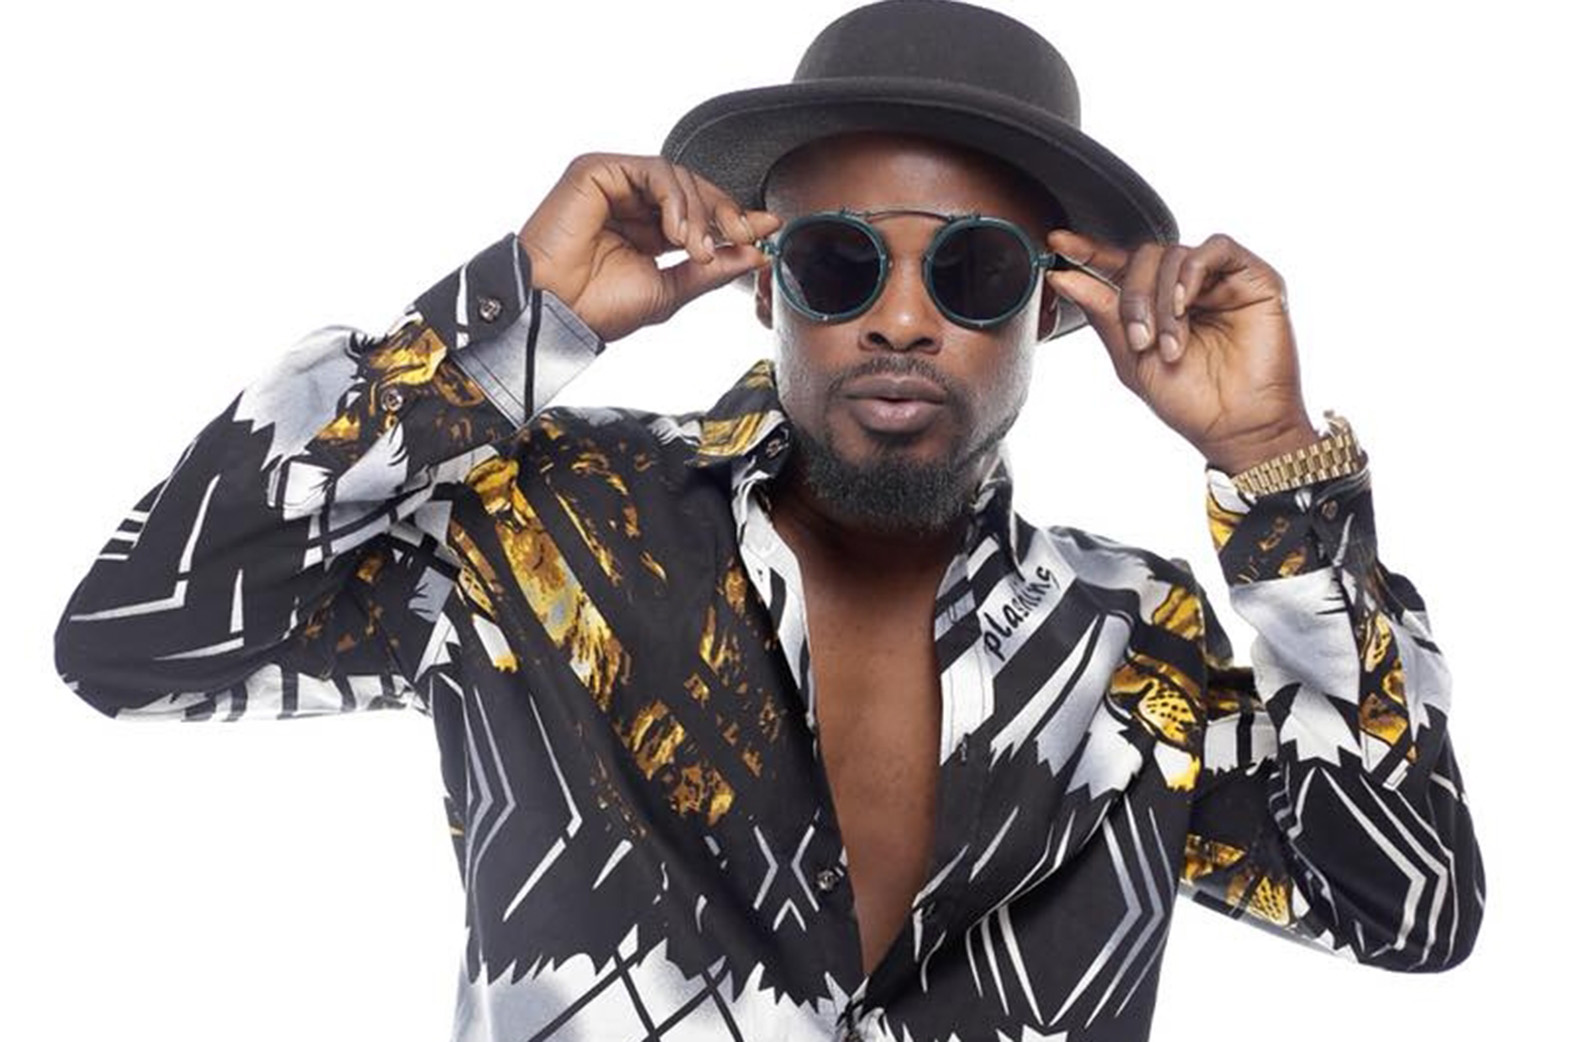 What do you think of Mix Master Garzy’s new look?